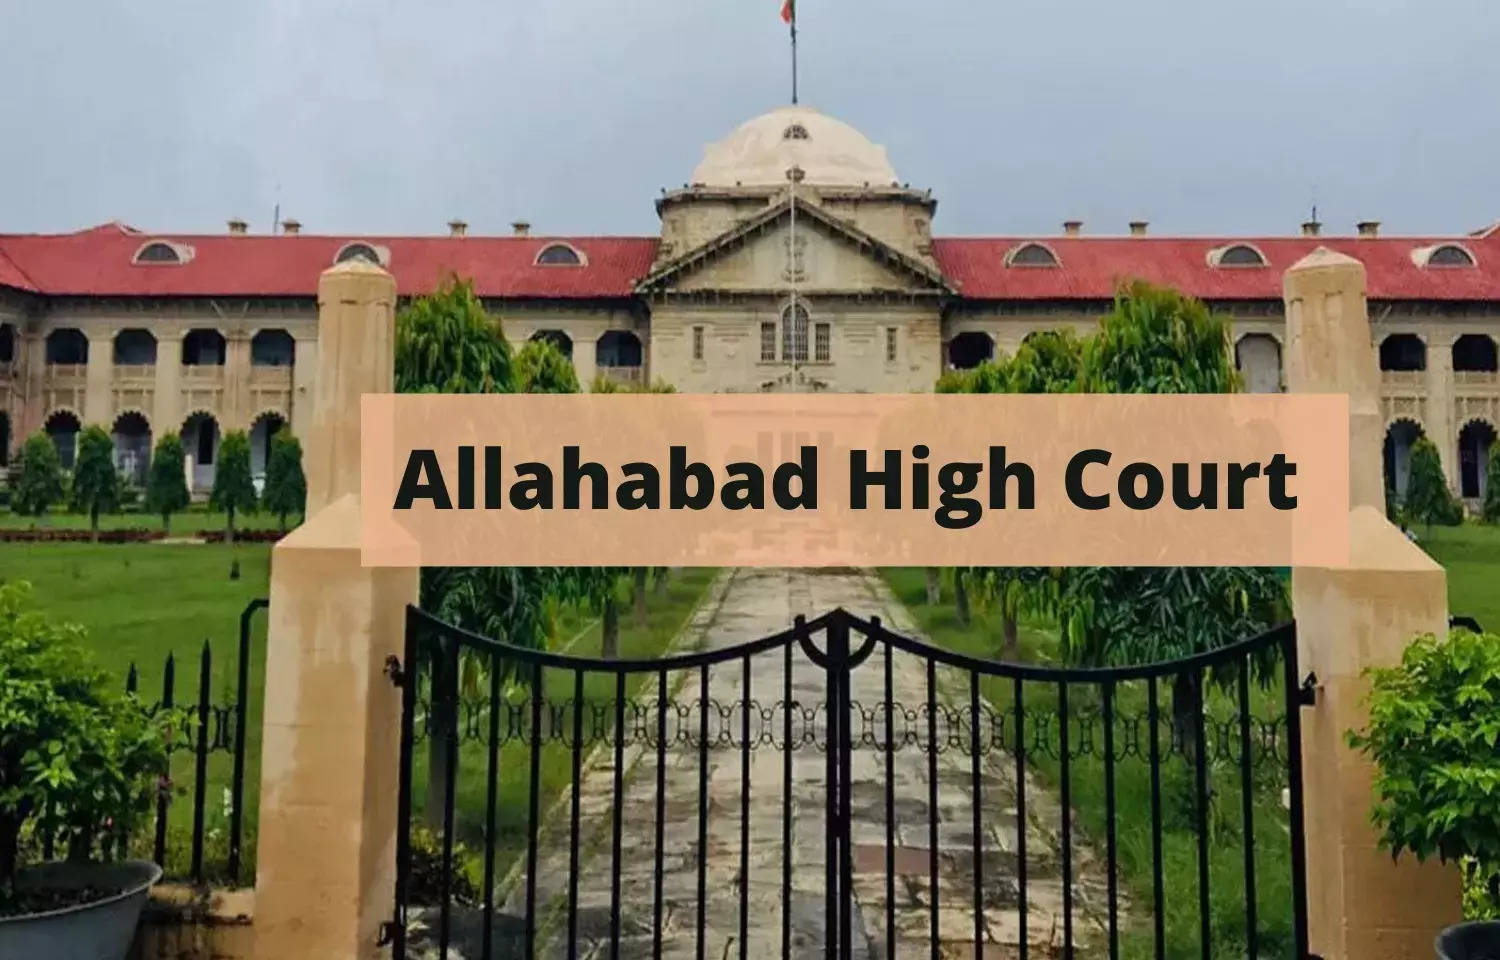 Centre elevates 20 additional judges as permanent judges in 4 high courts  including 10 in Allahabad HC, ET Government